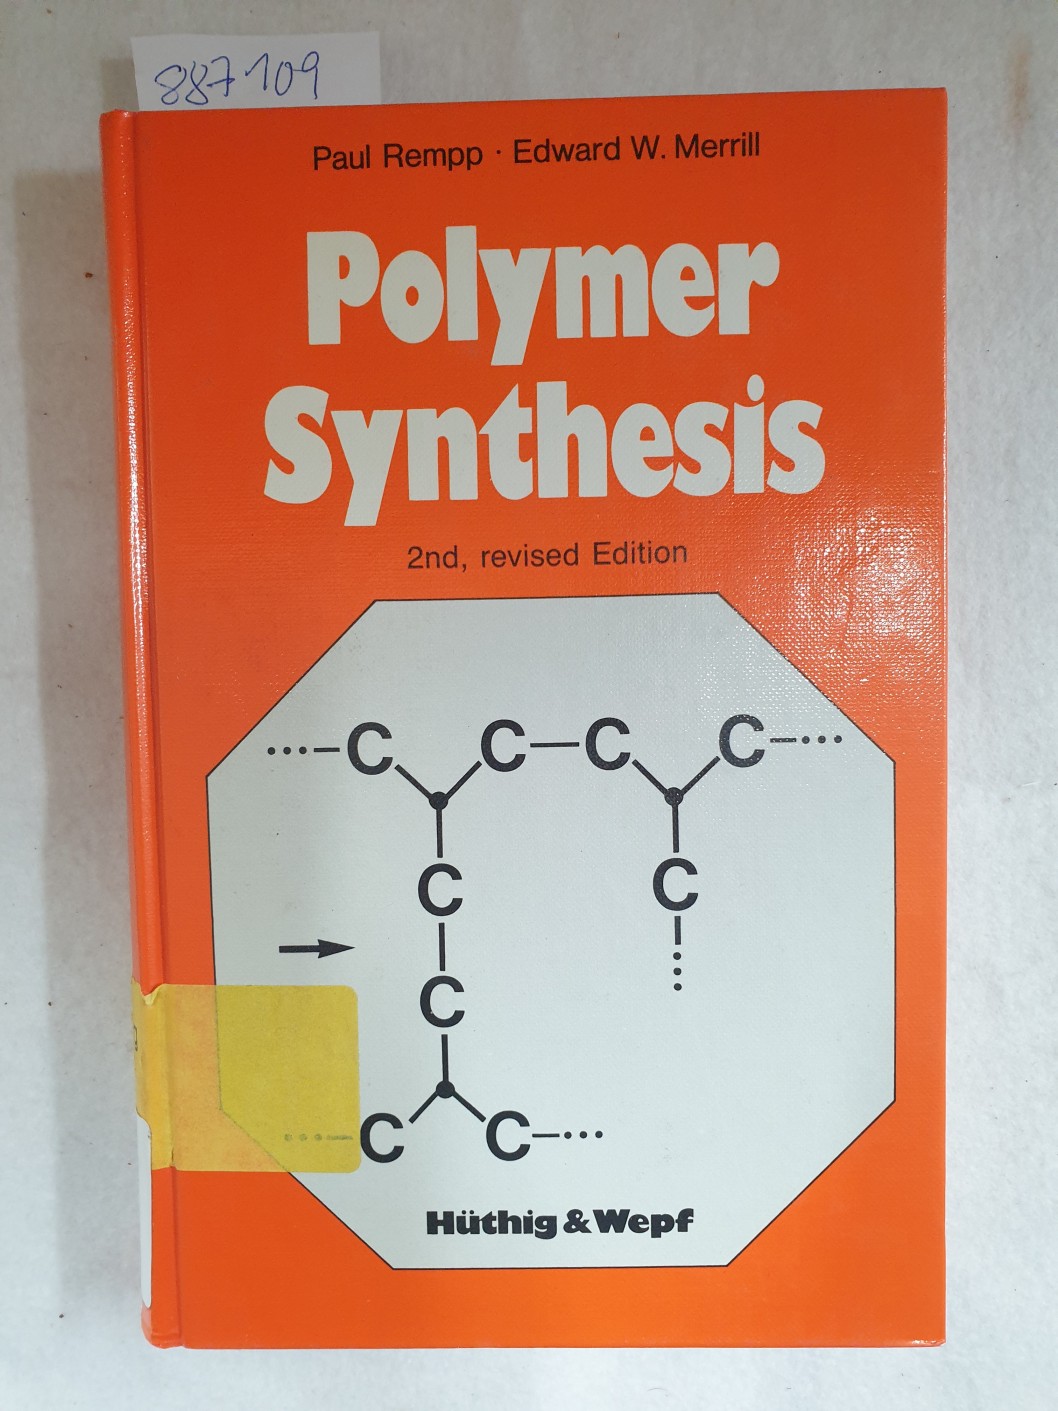 Polymer Synthesis : - Merill, Edward W. and Paul Rempp